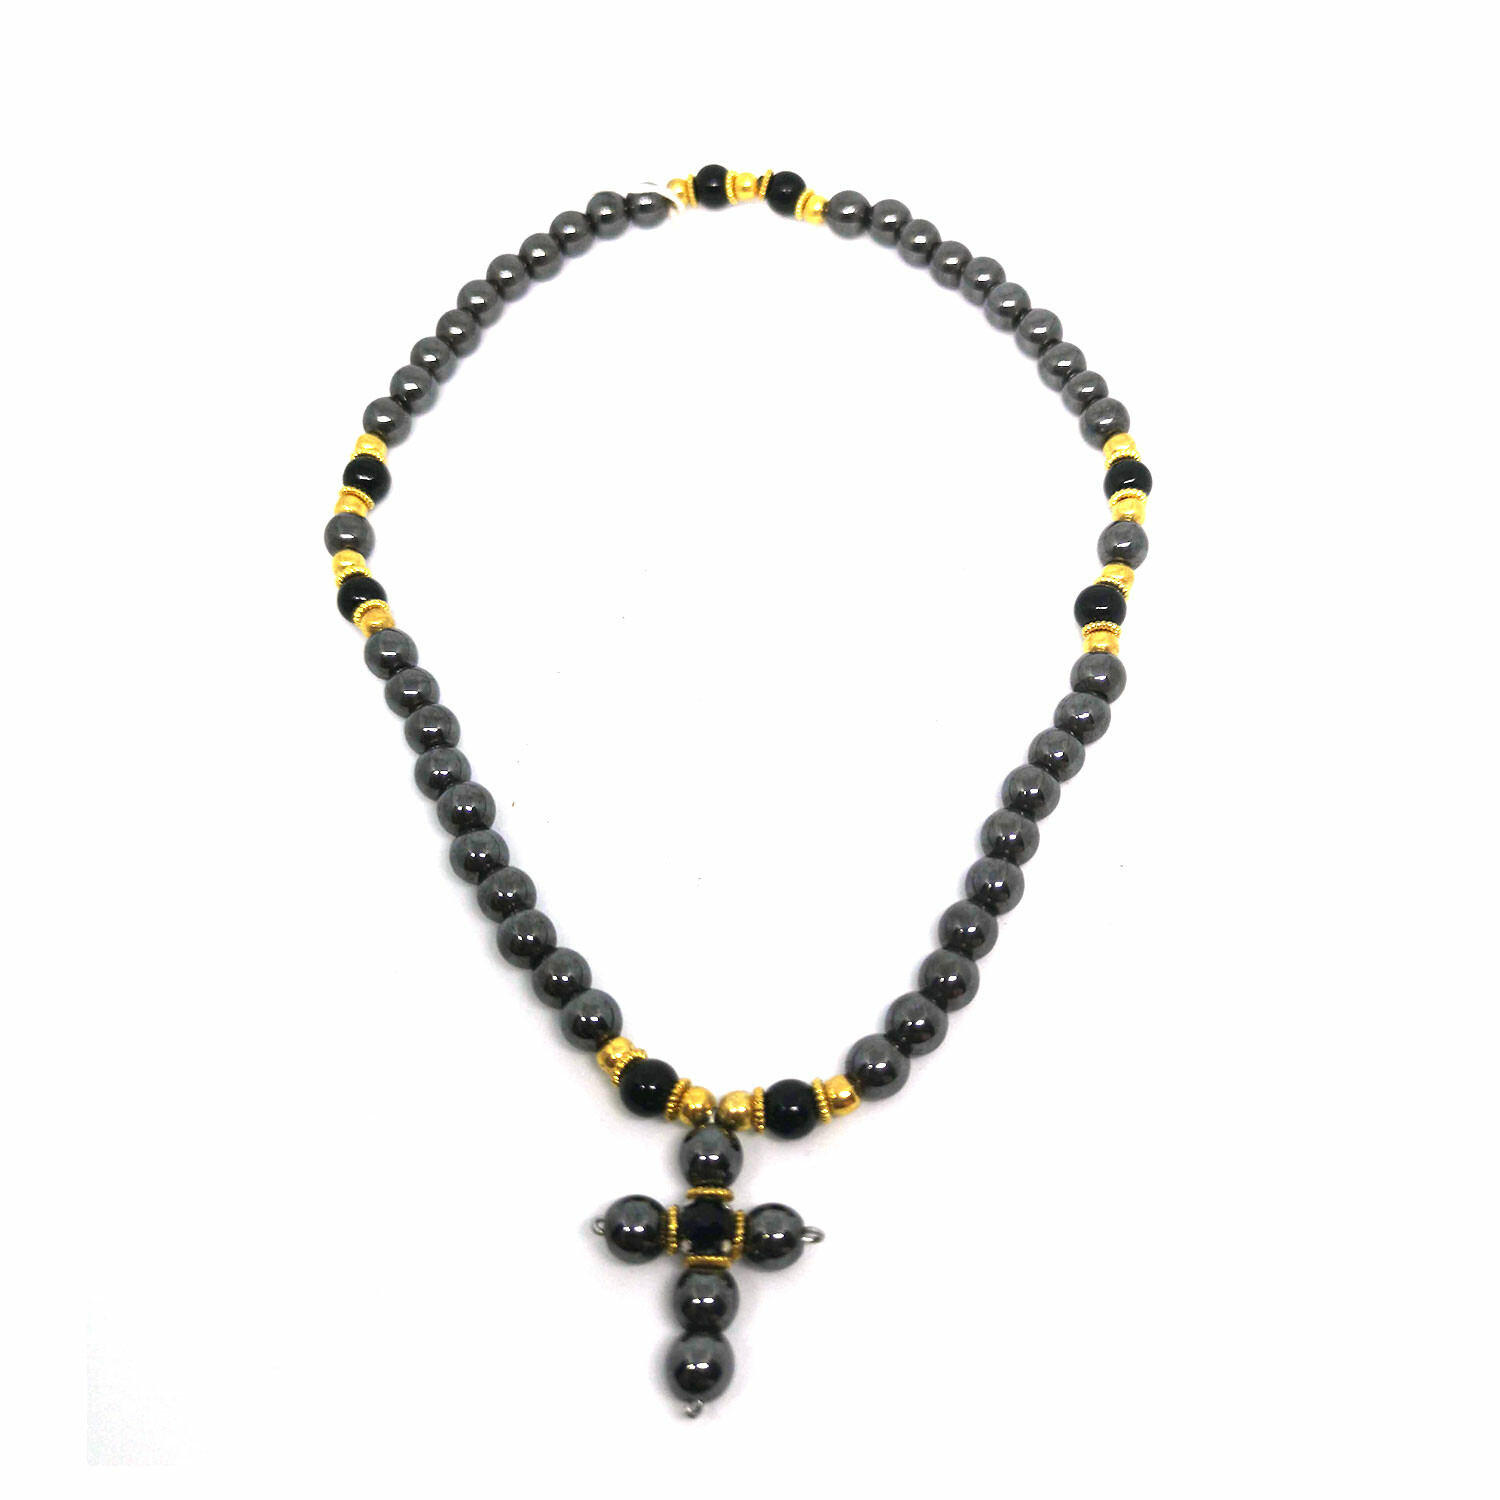 Athos' Rosary with the cross